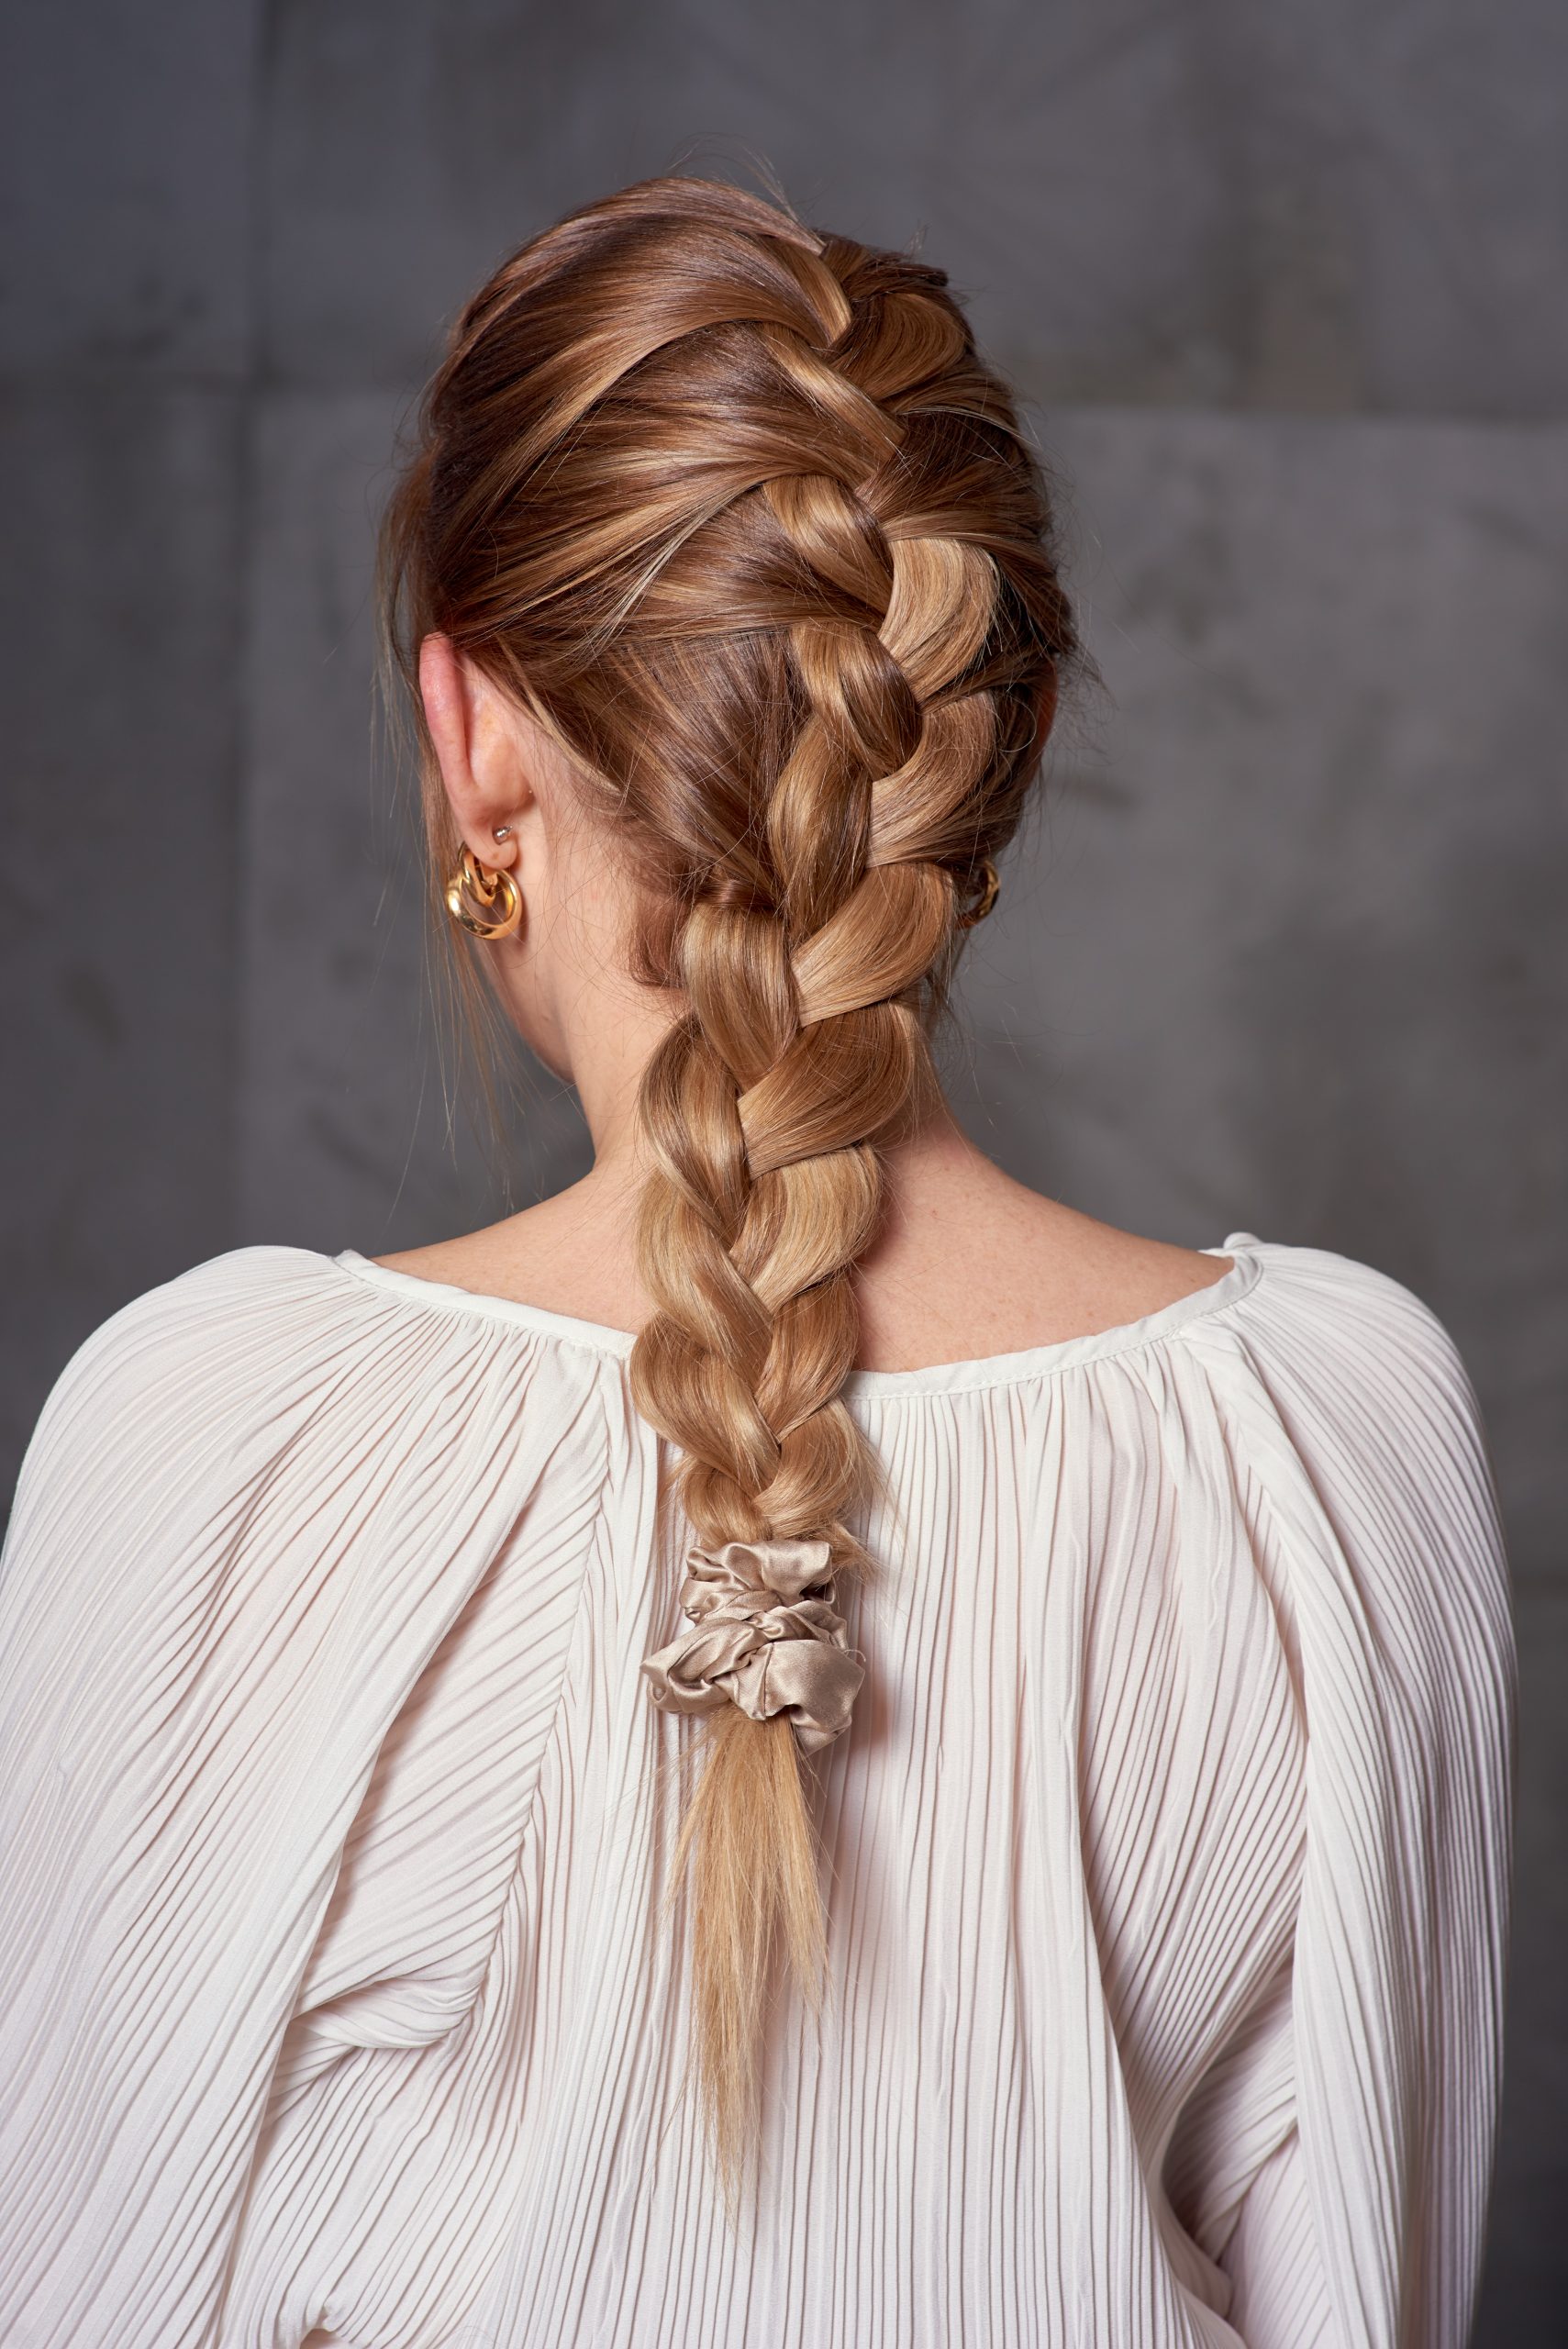 Secrets to Learning To Braid Hair - Professional Braiding